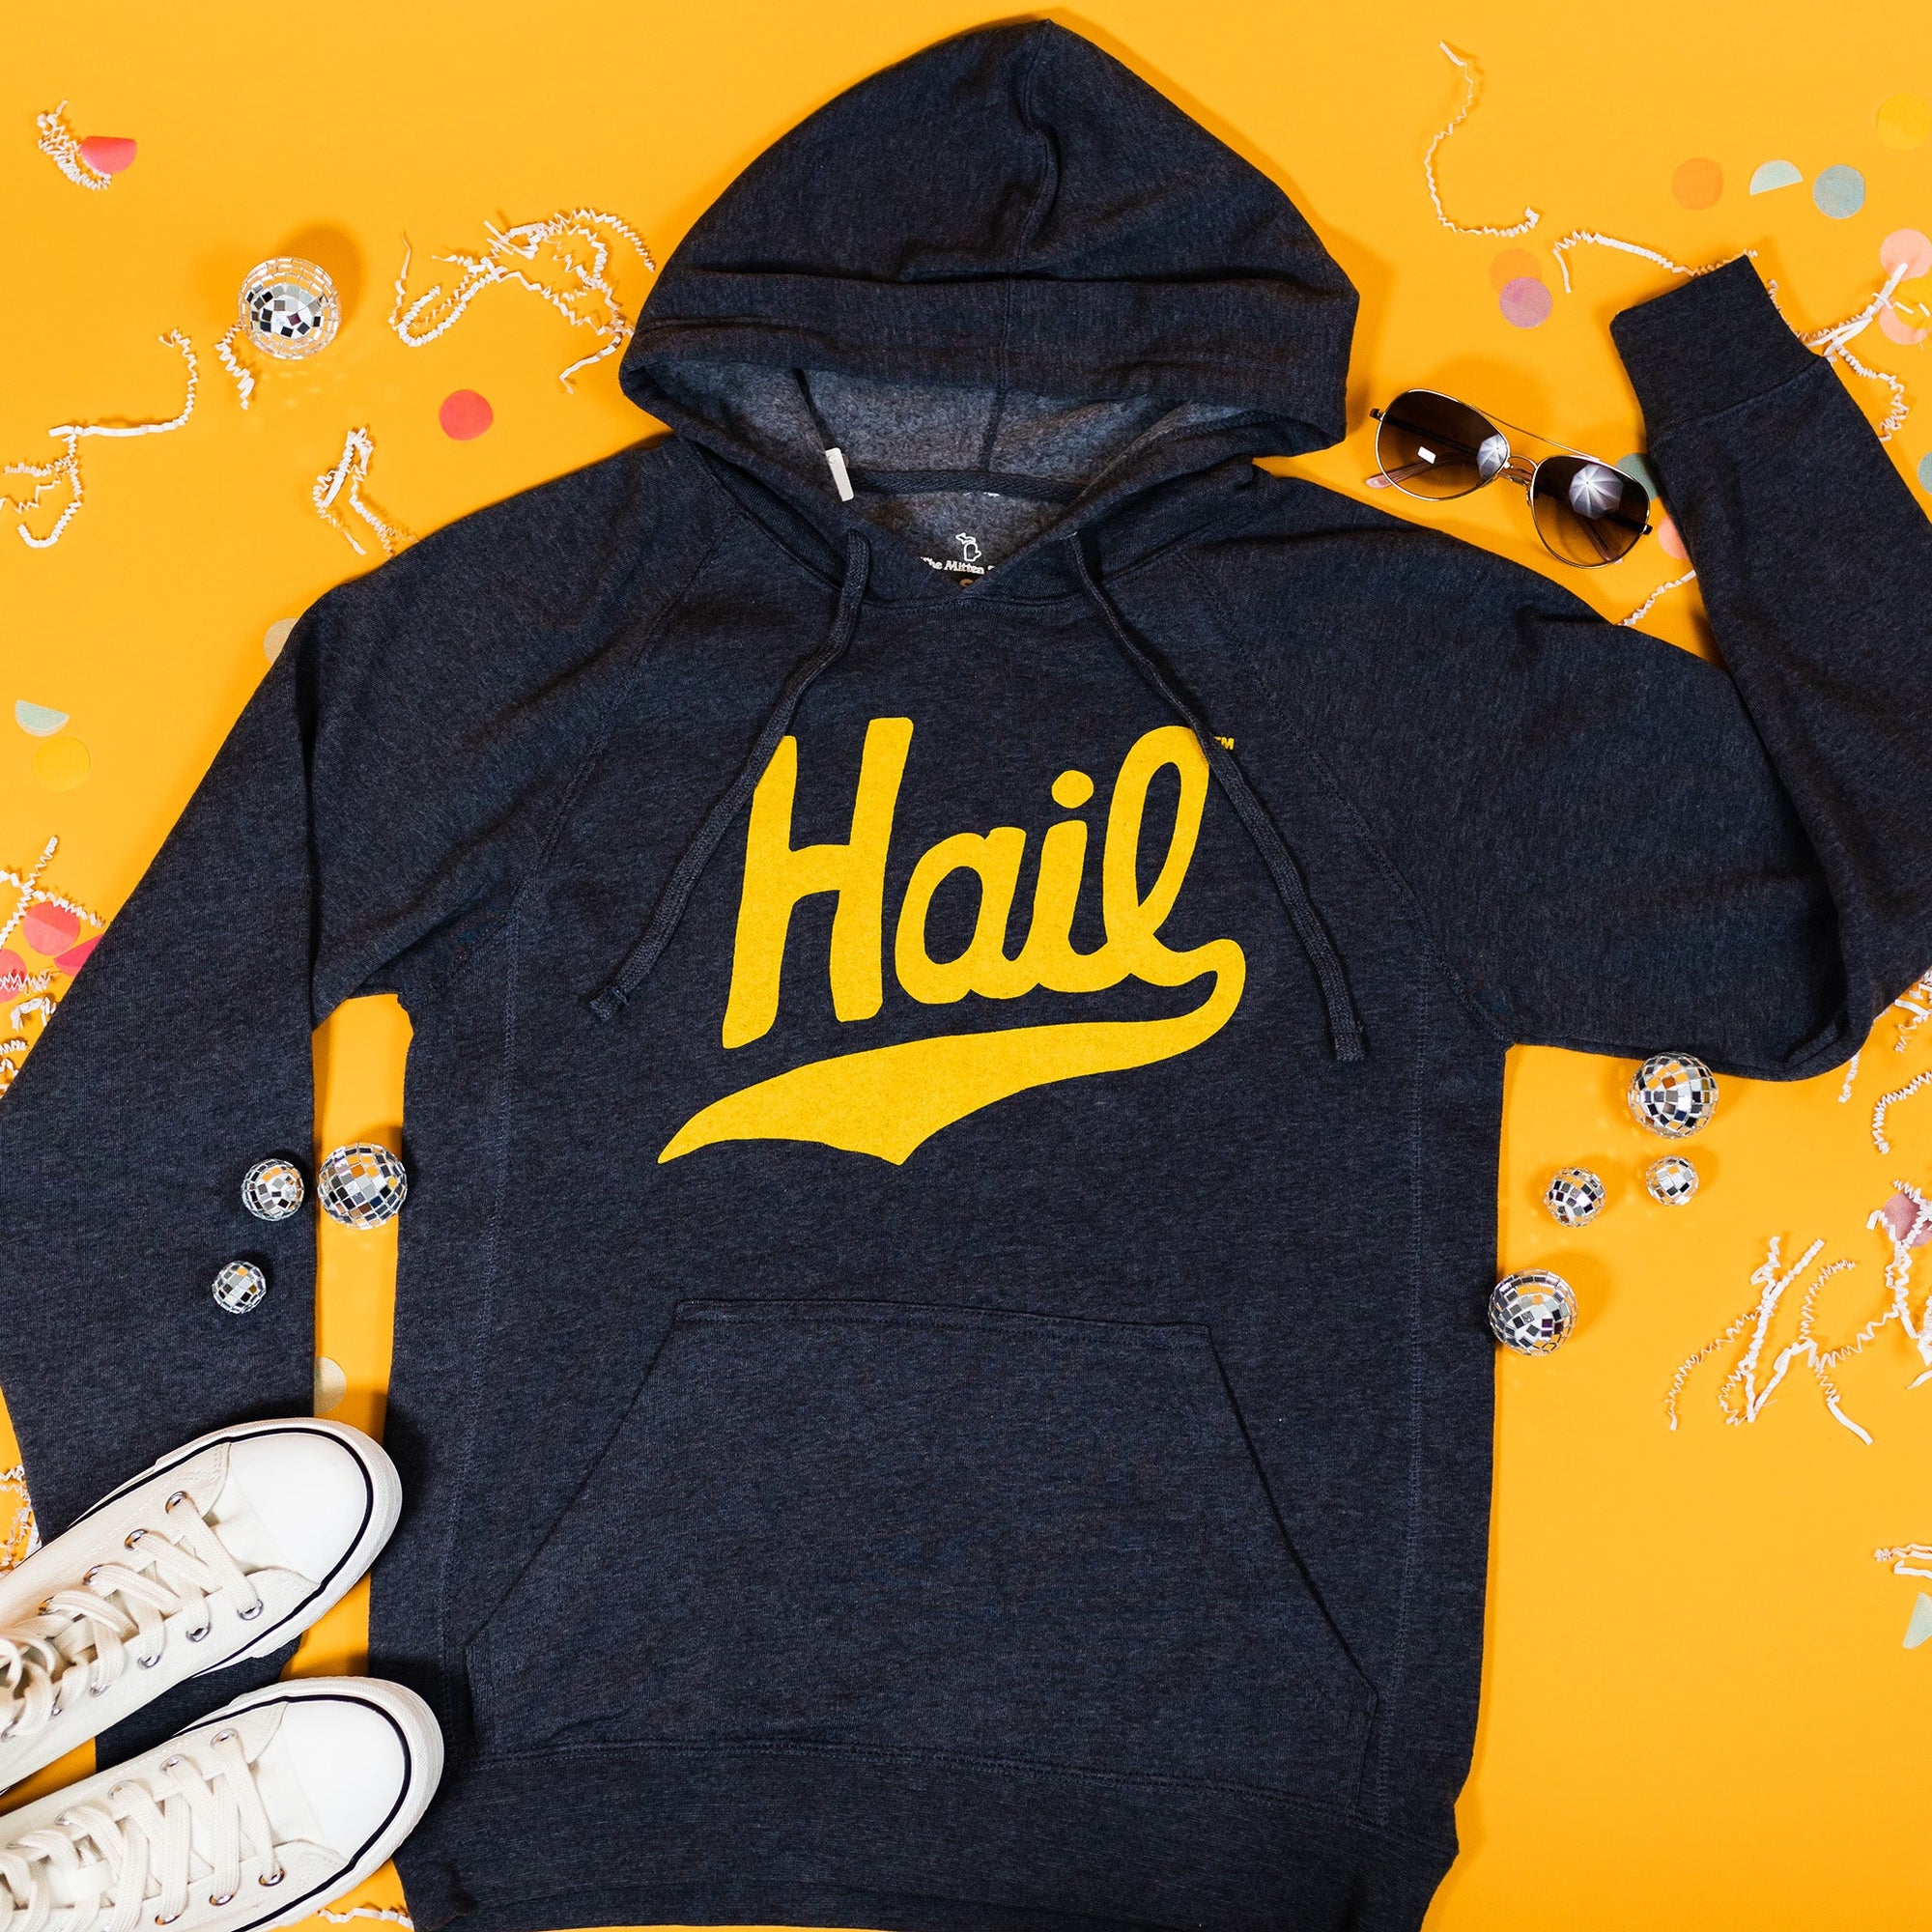 On a sunny mustard background sits a sweatshirt with white crinkle and big, colorful confetti scattered around. There are mini disco balls, sunglasses, and a pair of white sneakers. This navy sweatshirt features a vintage, hand lettered "Hail" in maize.